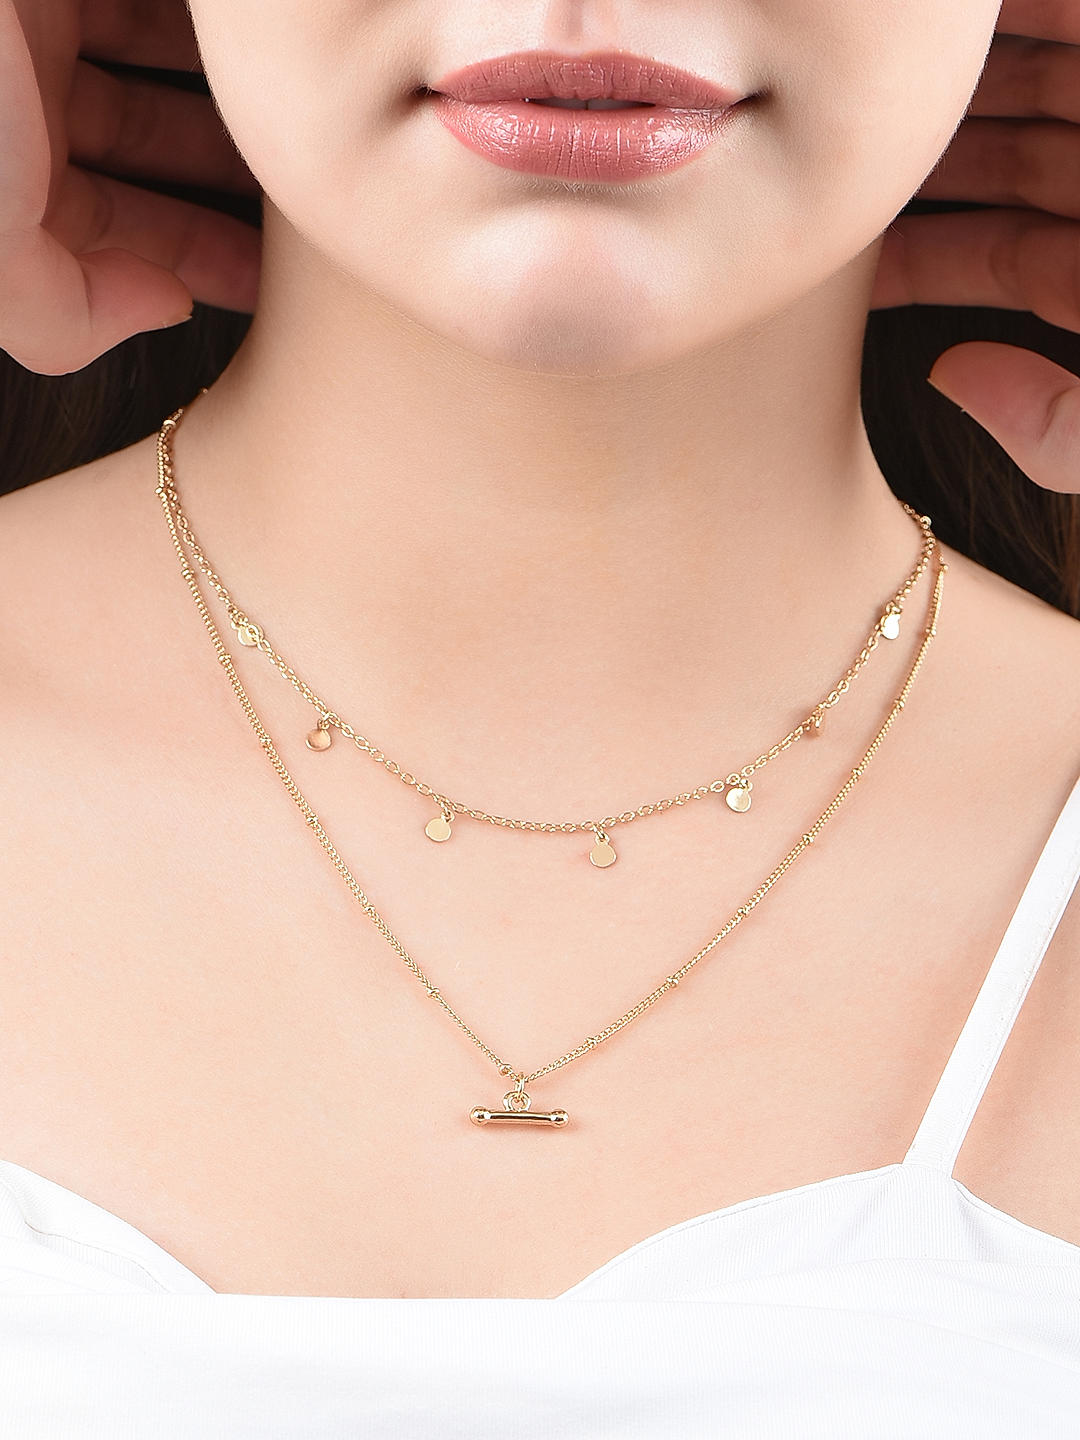 Amazon.com: 14K Gold filled 3 Layer Choker Chain Necklace - Designer  Handmade Delicate Short Necklace Comes With Three Layers 13 + 3 inches :  Handmade Products